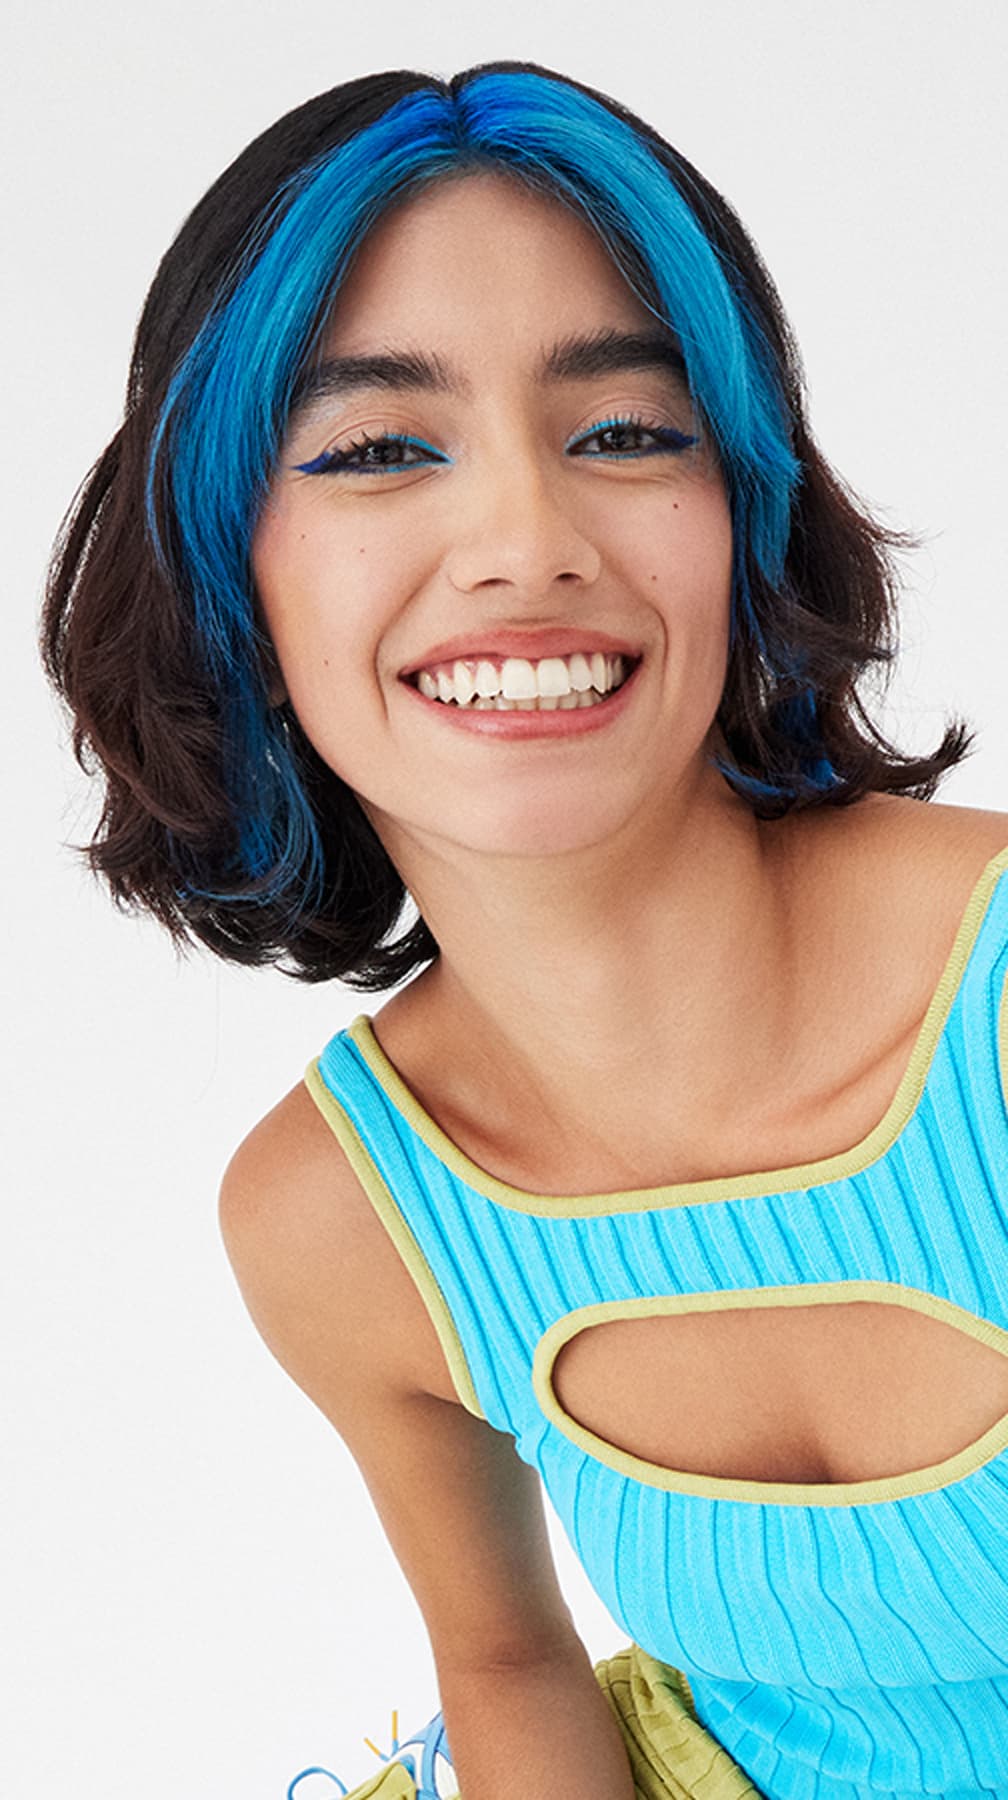 Young woman smiling, featuring Arctic Fox's Aquamarine hair color highlights, adding a pop of vivid blue to her natural dark hair.